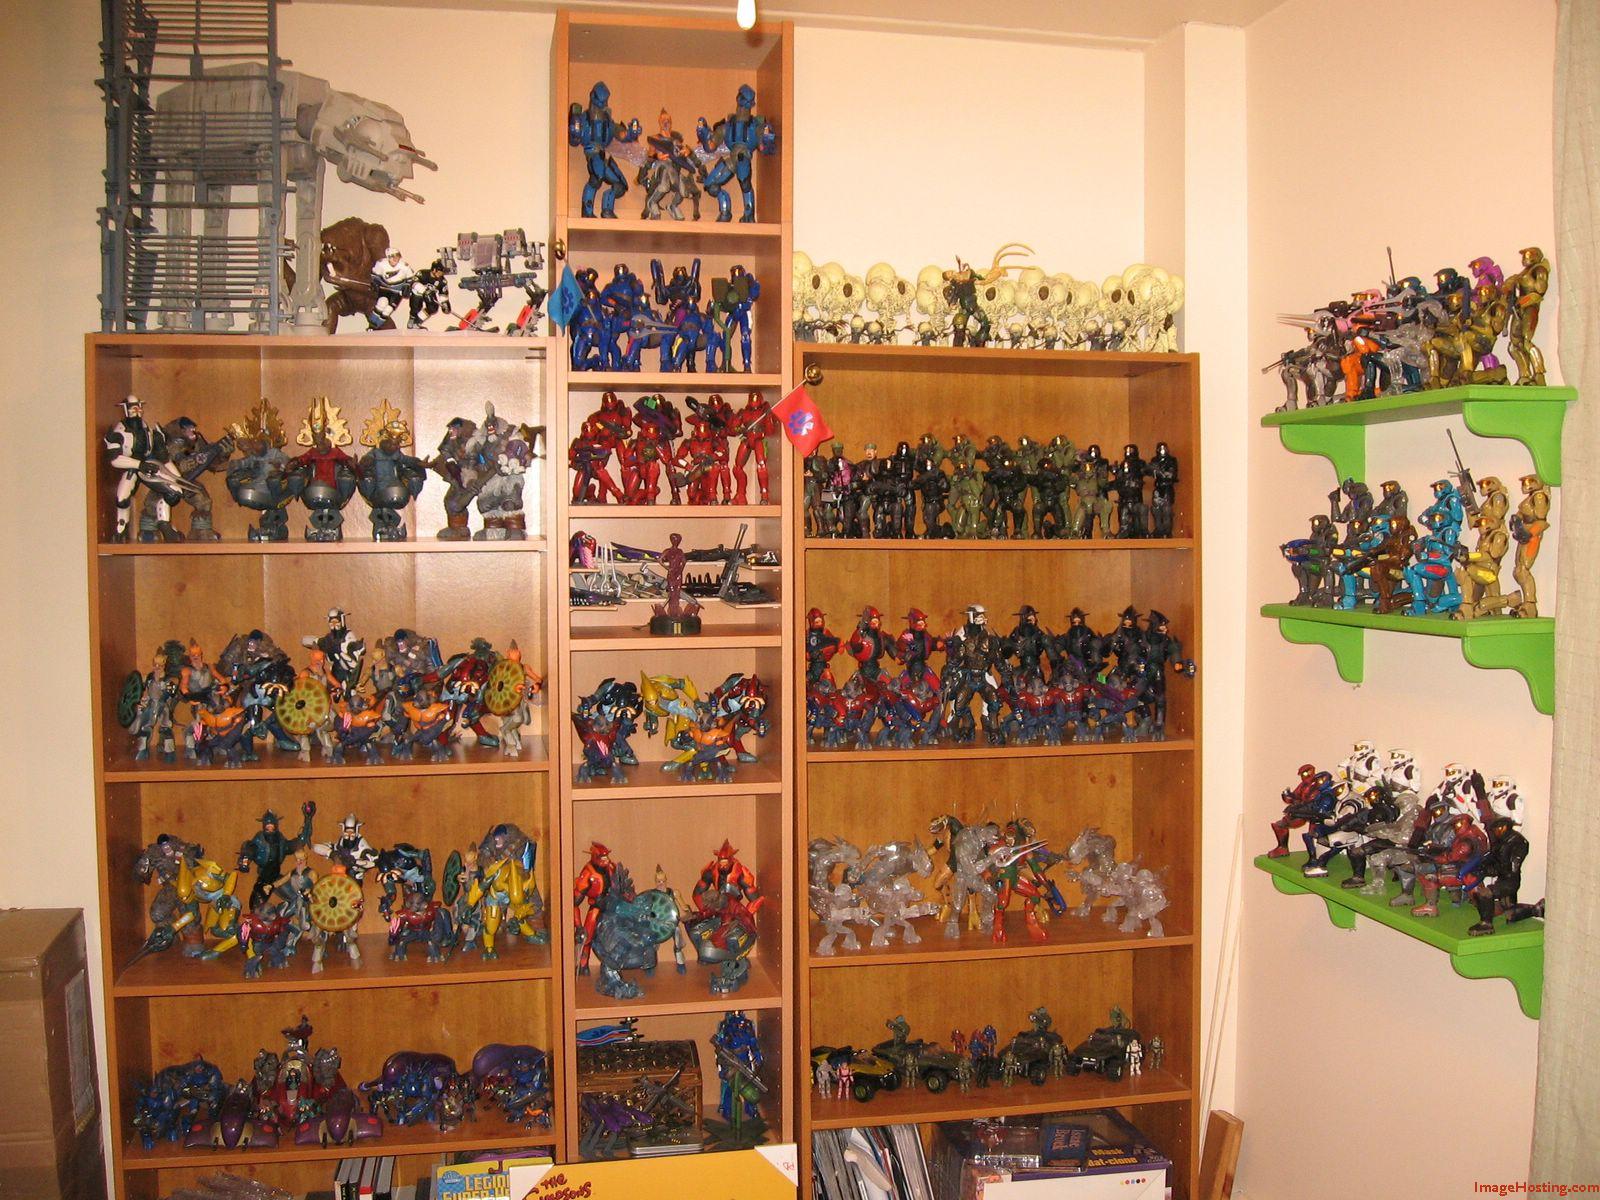 halo figure collection